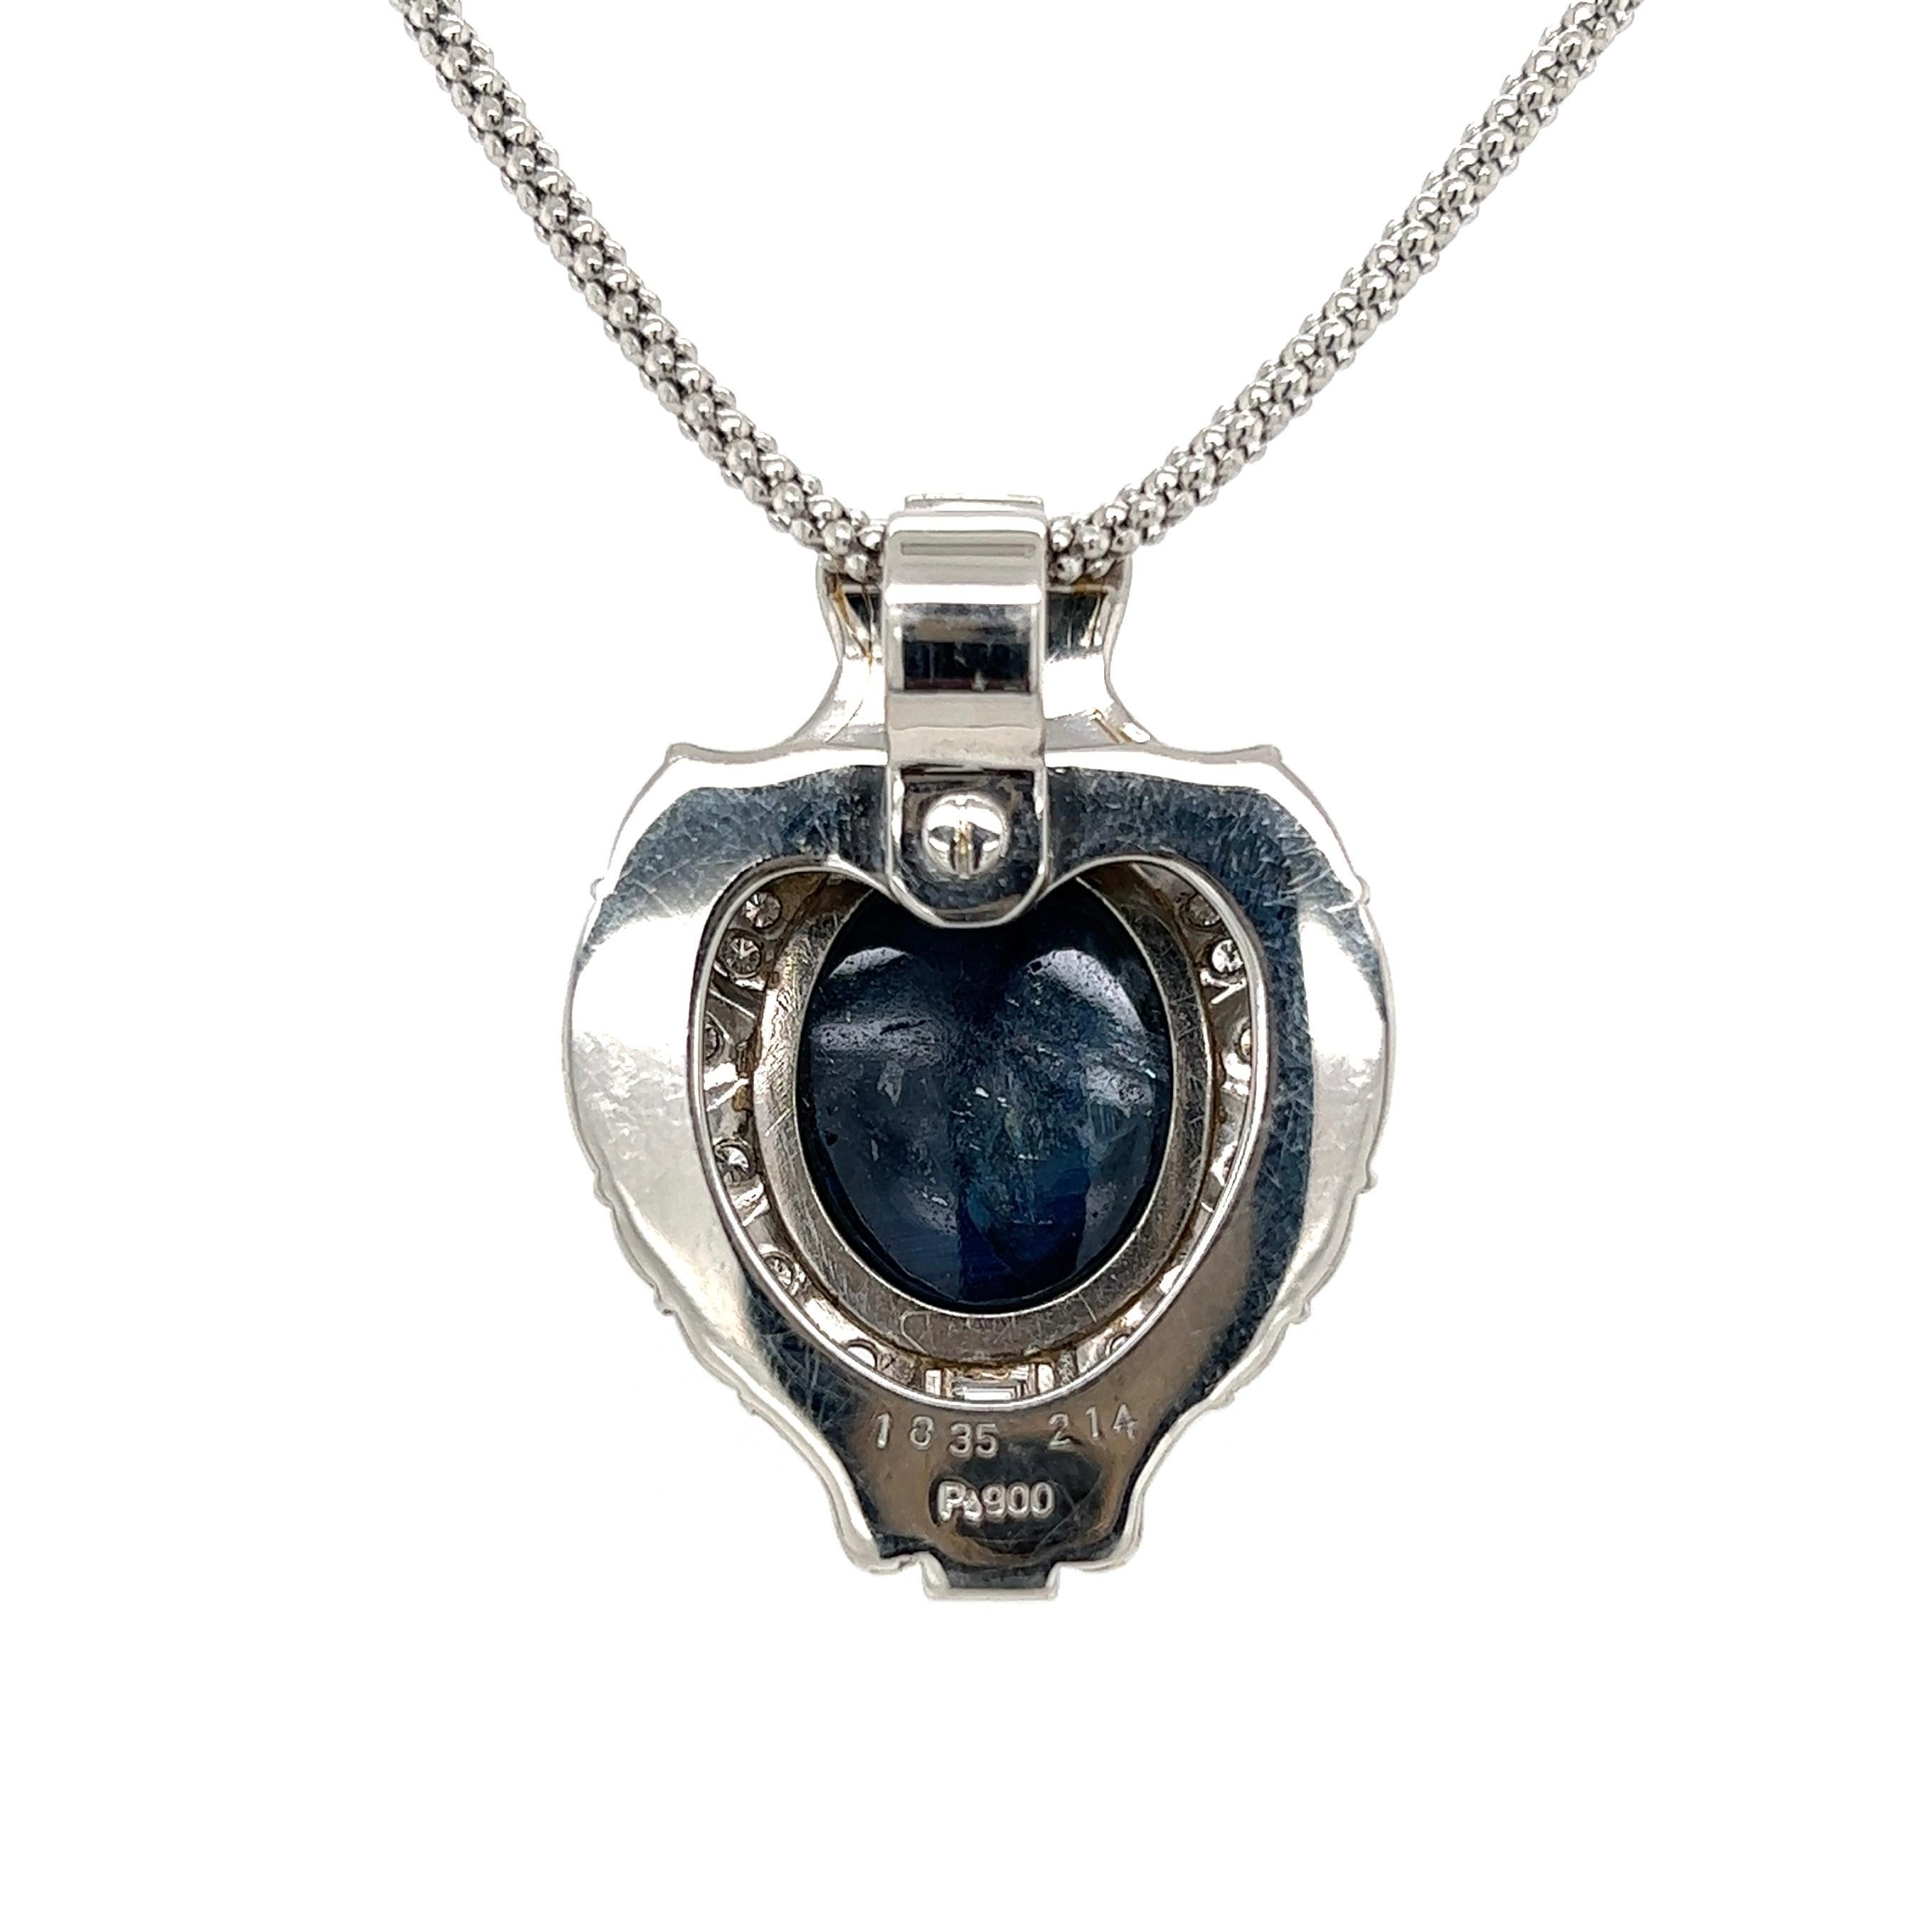 18.35 Carat Sapphire Diamond Platinum Pendant Necklace GIA Estate Fine Jewelry In Excellent Condition For Sale In Montreal, QC